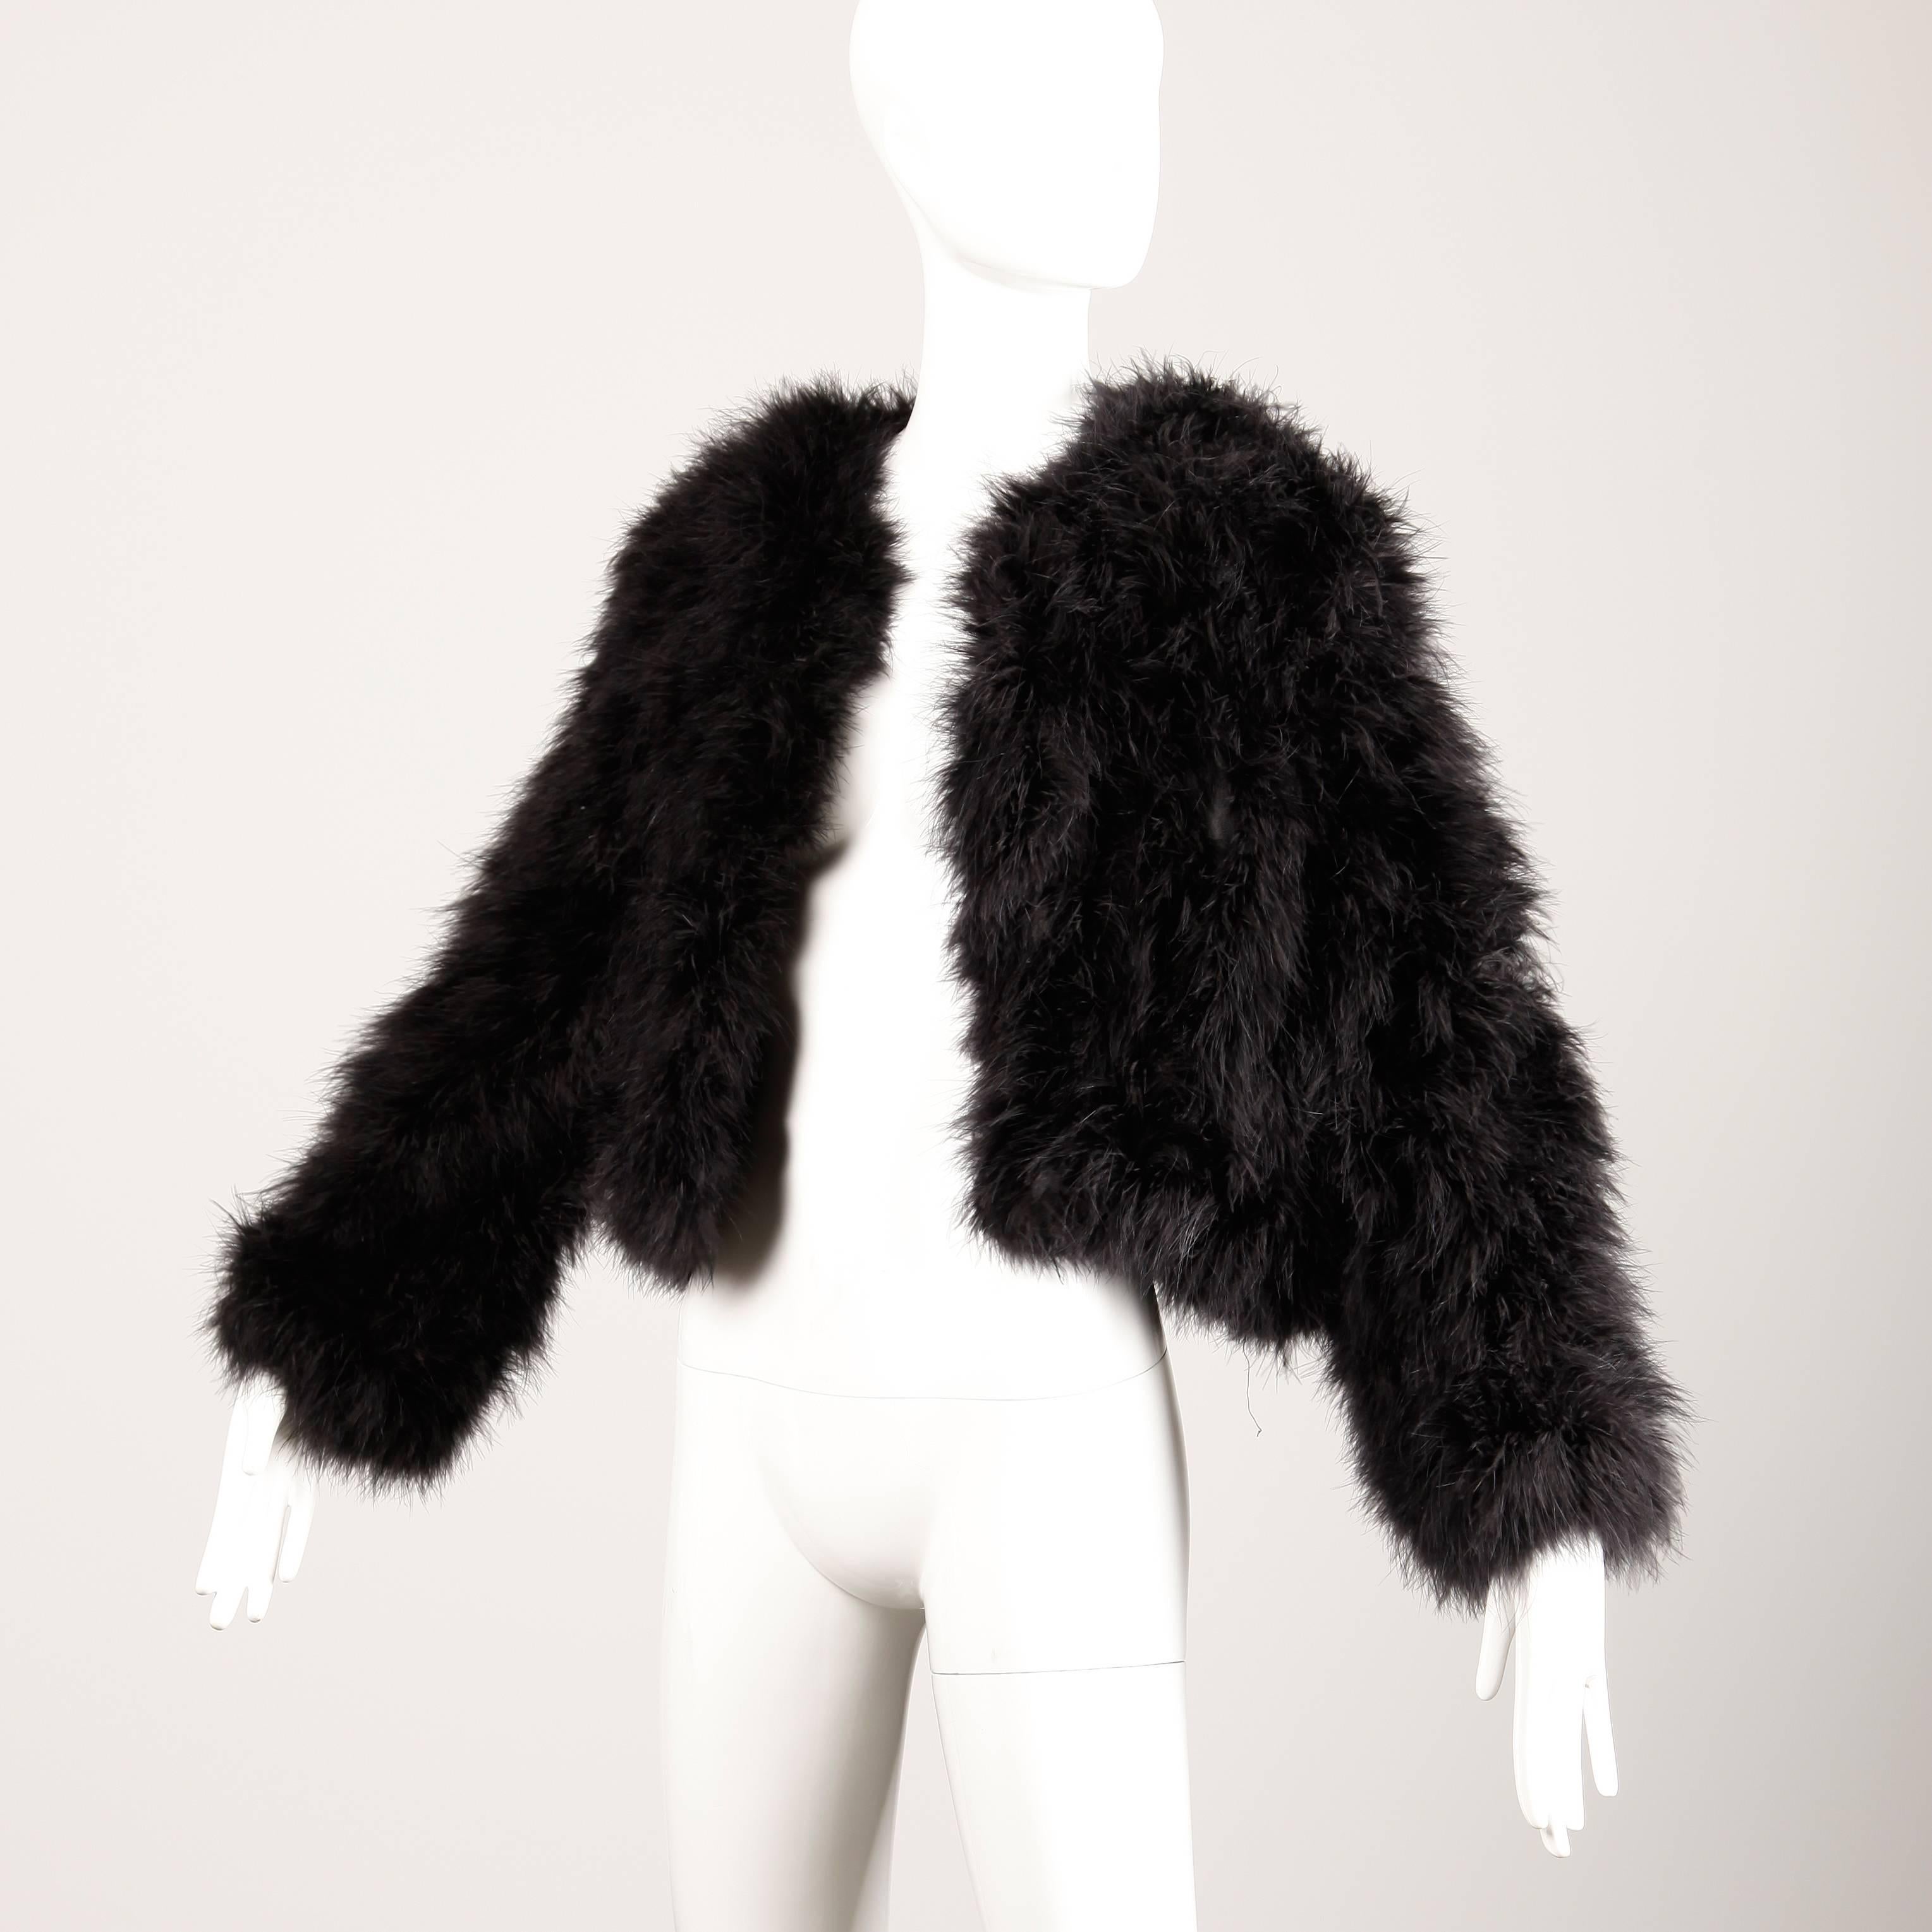 Fluffy soft vintage black maribou feather jacket by Sakowitz. Fully lined with hook closure. Oversized fit looks great on sizes small-large. The bust measures 42